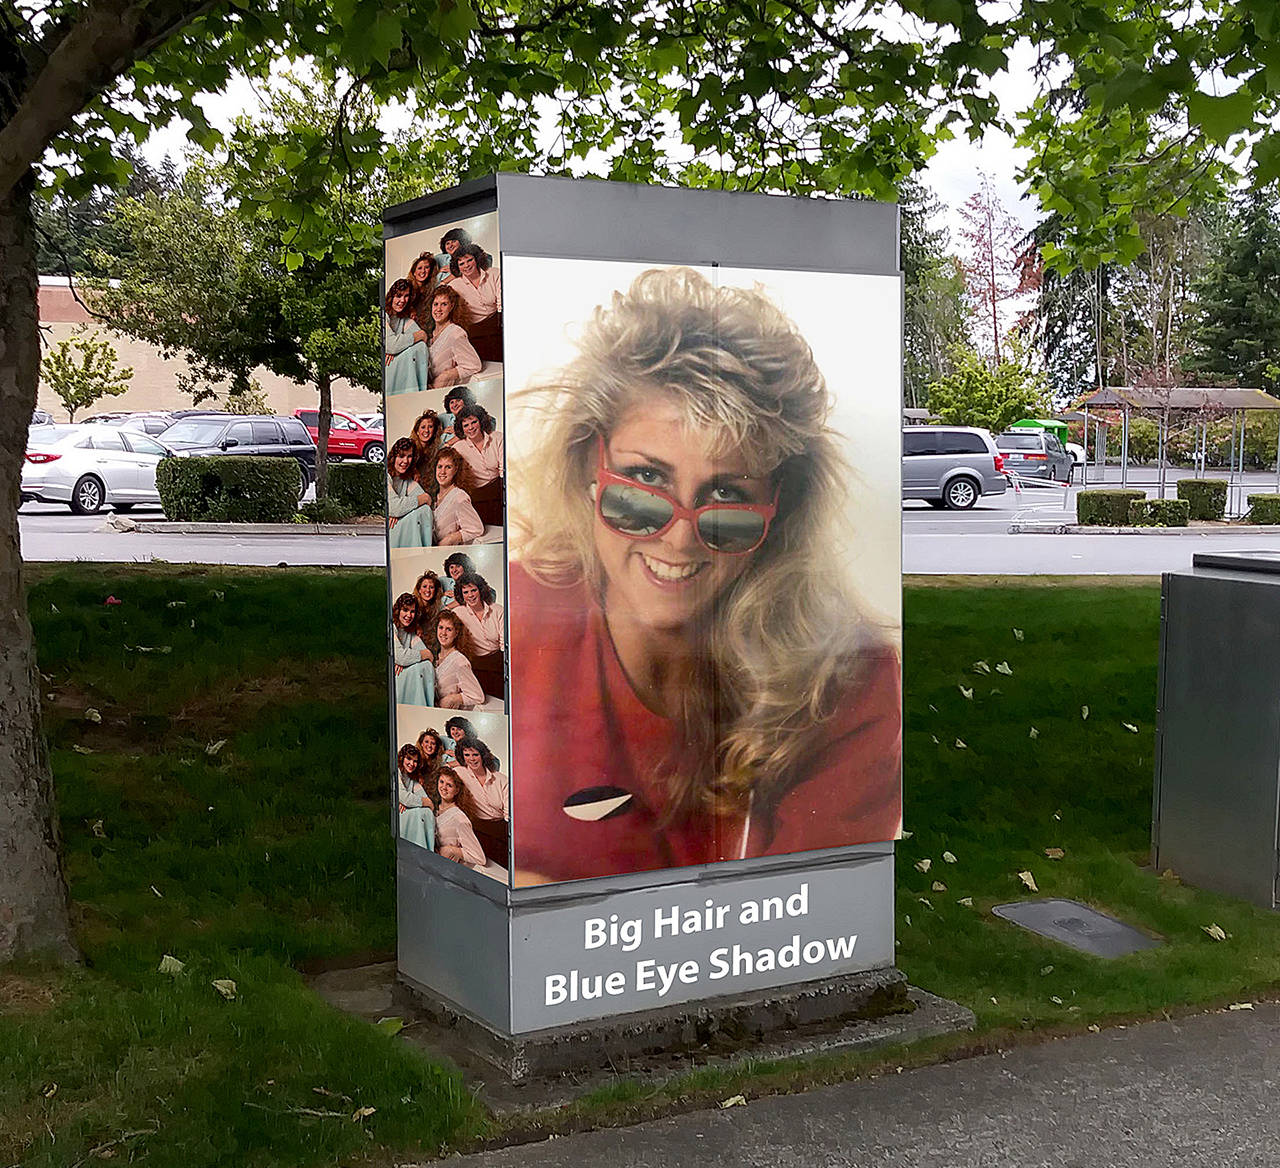 This photo illustration is a mockup of what the traffic signal box might look like for Lynnwood’s “Big Hair and Blue Eye Shadow” photo contest to art up a box near the Alderwood mall. That’s Shannon Sessions, Lynnwood city councilwoman, in her 1988 Meadowdale High School graduation photo. (City of Lynnwood)